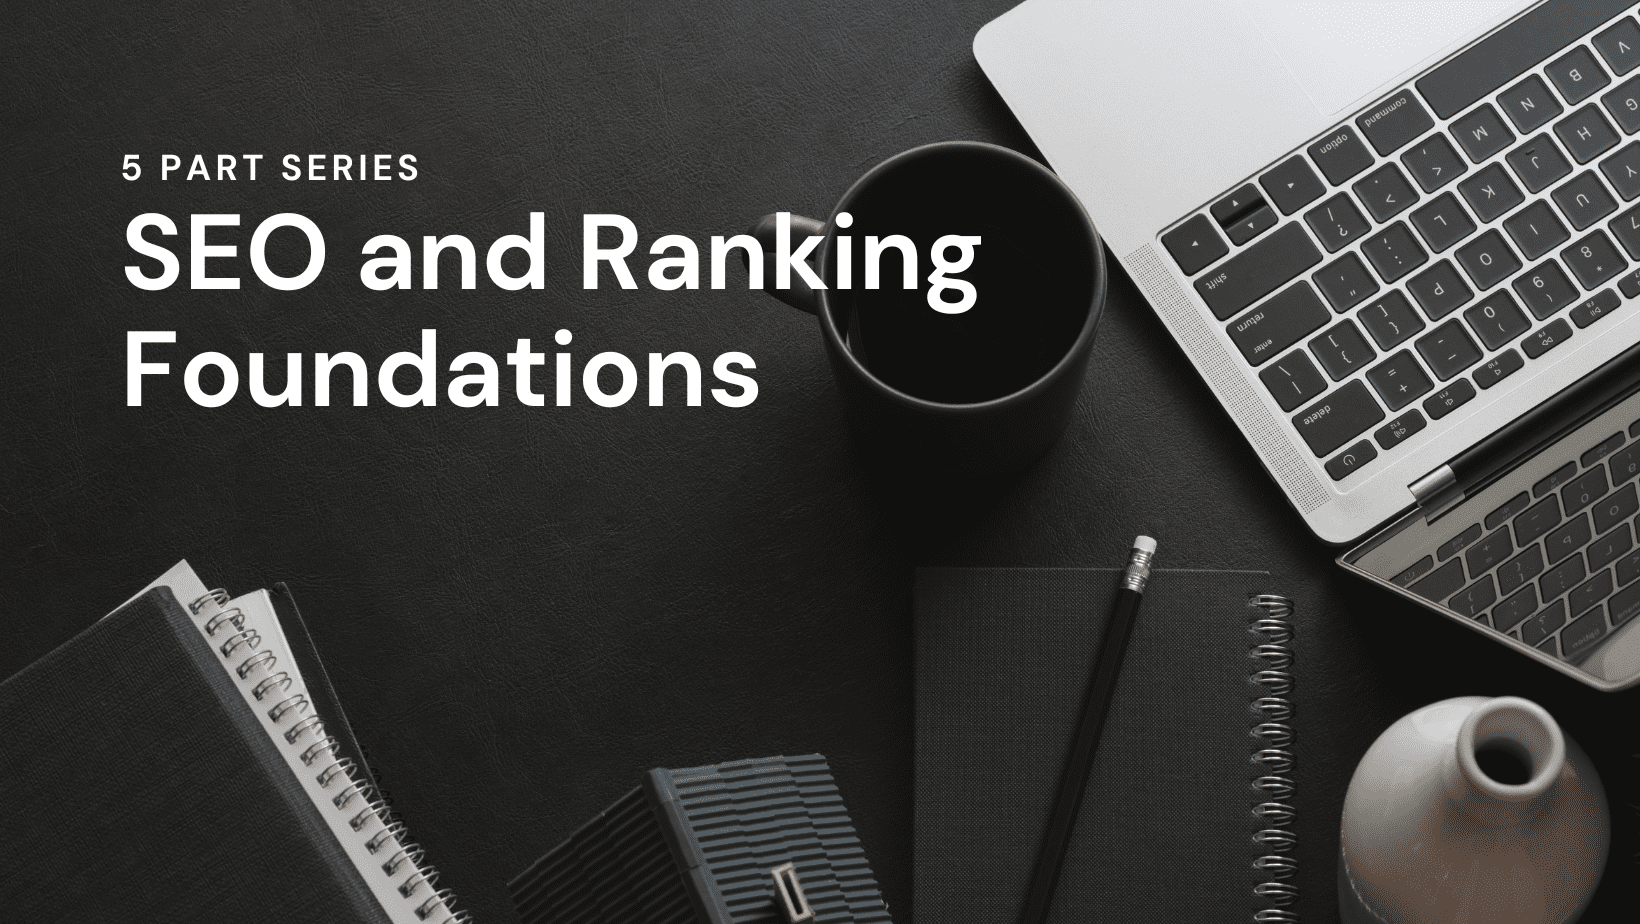 5 PART SERIES SEO and Ranking Foundations